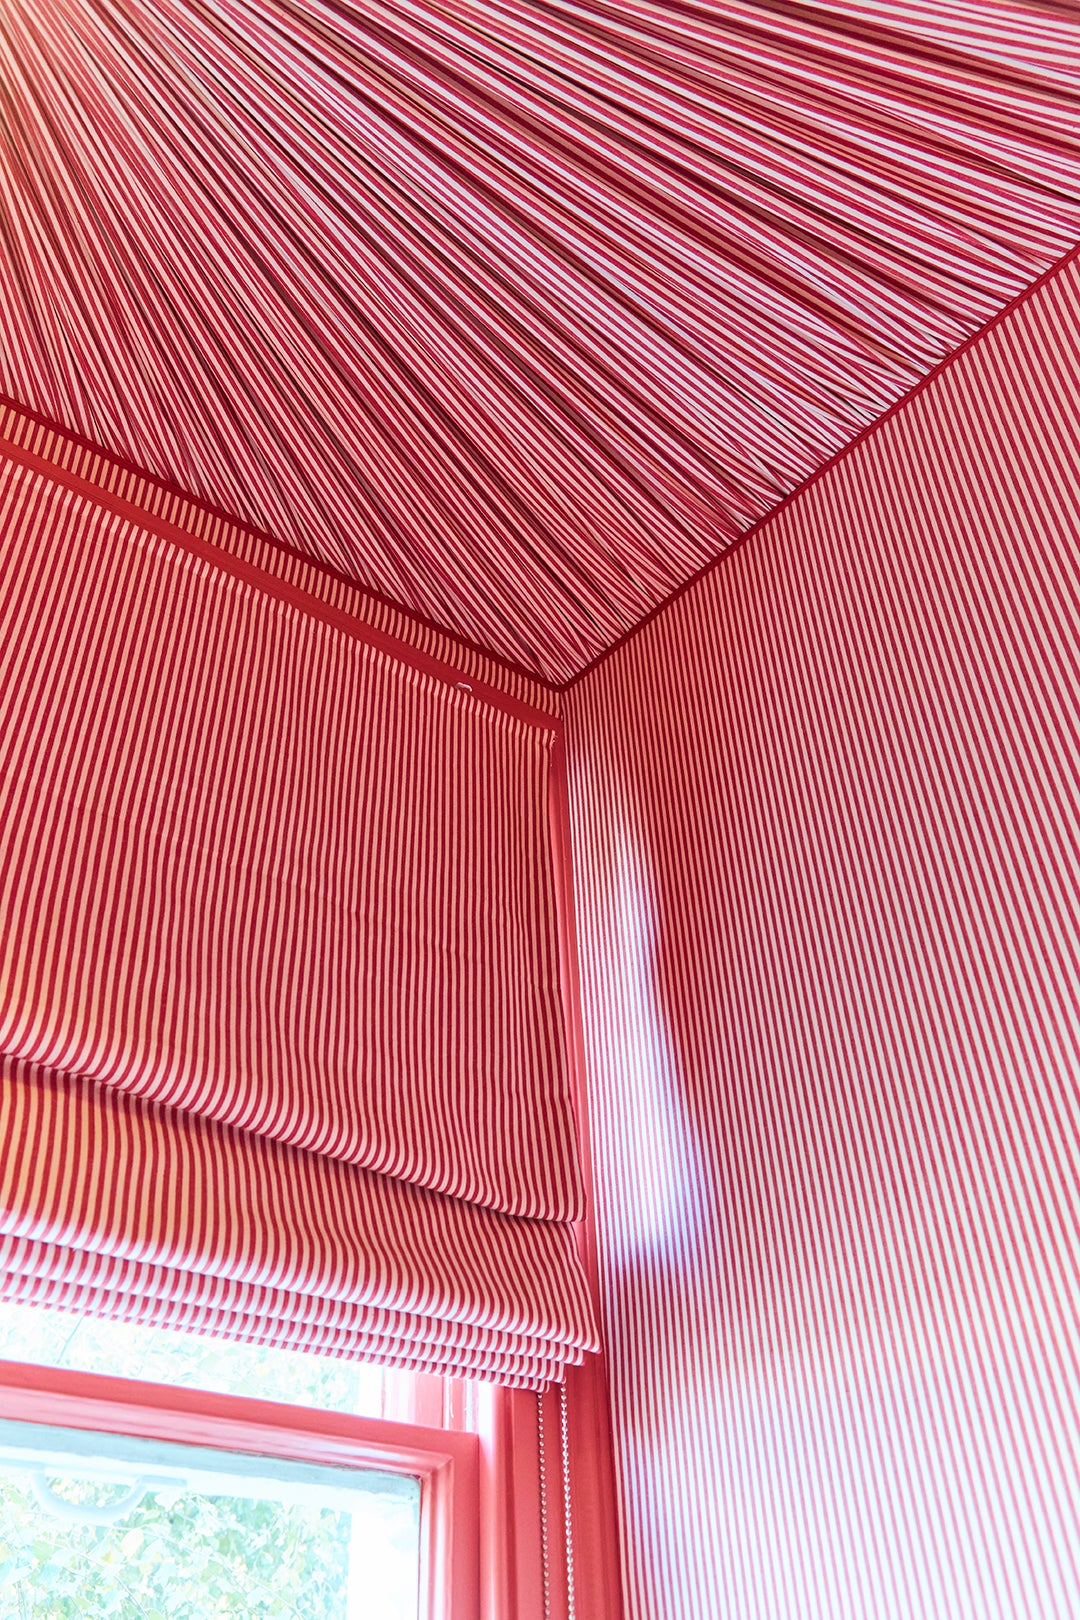 tenting ceiling in striped bed nook